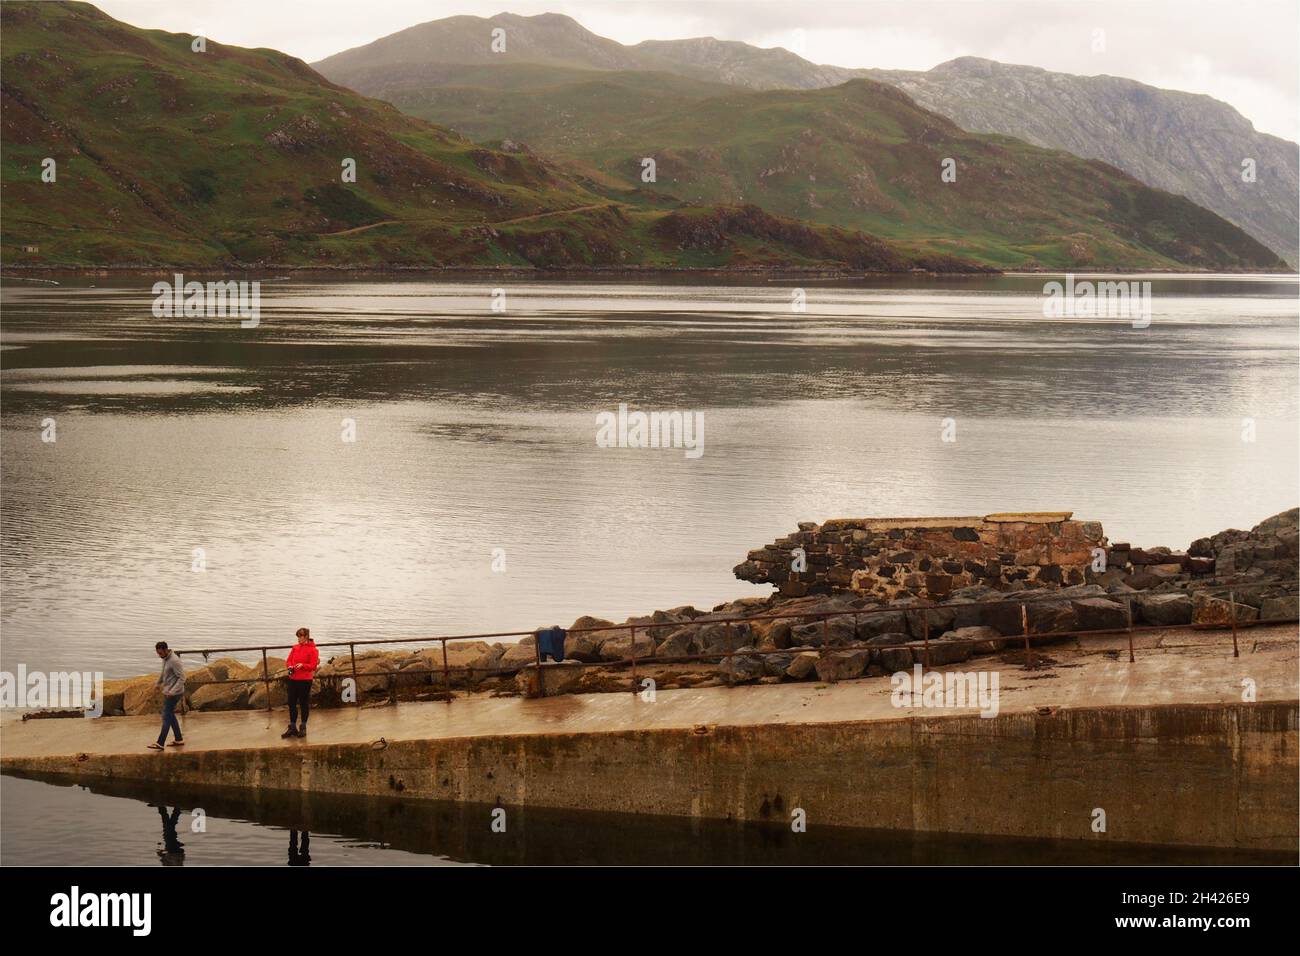 A young man and woman fishing on a slipway at Kylesku pier by Loch Gleann |Dubh, Sutherland, Scotland Stock Photo